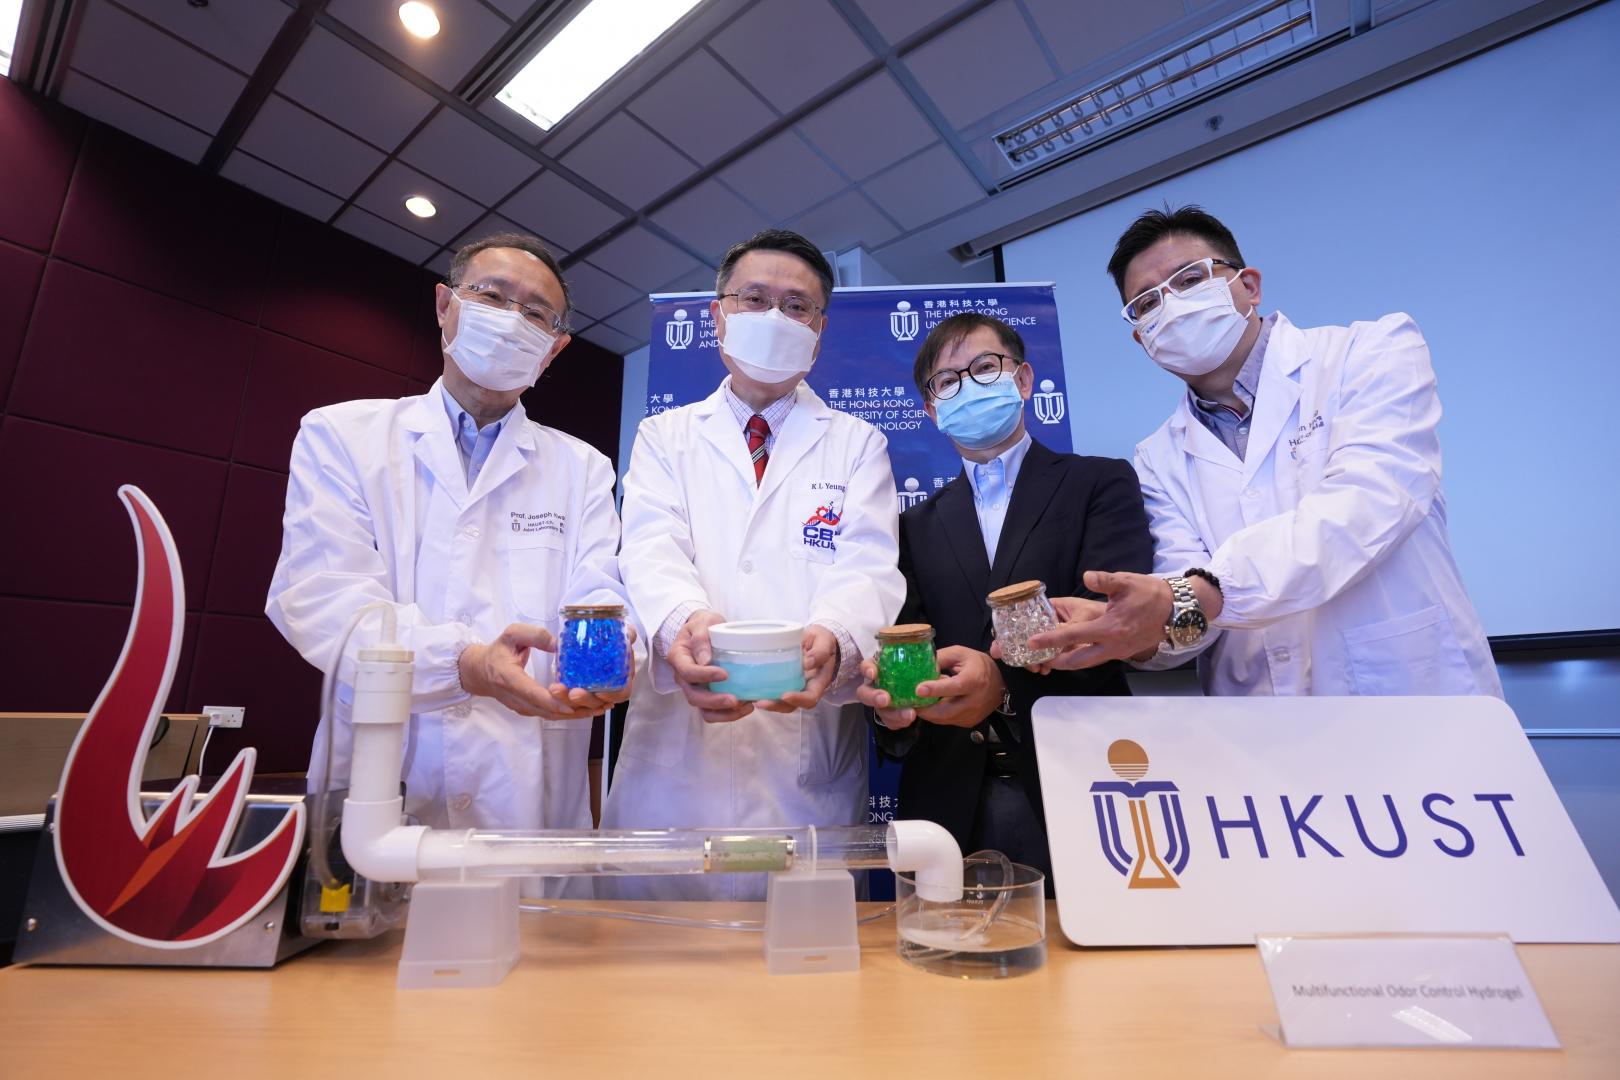 (From left) A group photo of Prof. Joseph Kwan, Adjunct Professor of Division of Environment and Sustainability (ENVR) and Chairman of Board of Directors of Haven of Hope Christian Service (HOHCS); Prof. YEUNG King-Lun, Professor at HKUST’s Department of Chemical and Biological Engineering and ENVR; Dr. David CHUNG, Under Secretary for Innovation and Technology; and Mr. Hamilton HUNG, Chief Marketing Officer of Chiaphua Industries Limited, holding different formulas of MOC hydrogel and AMGel (light blue bot